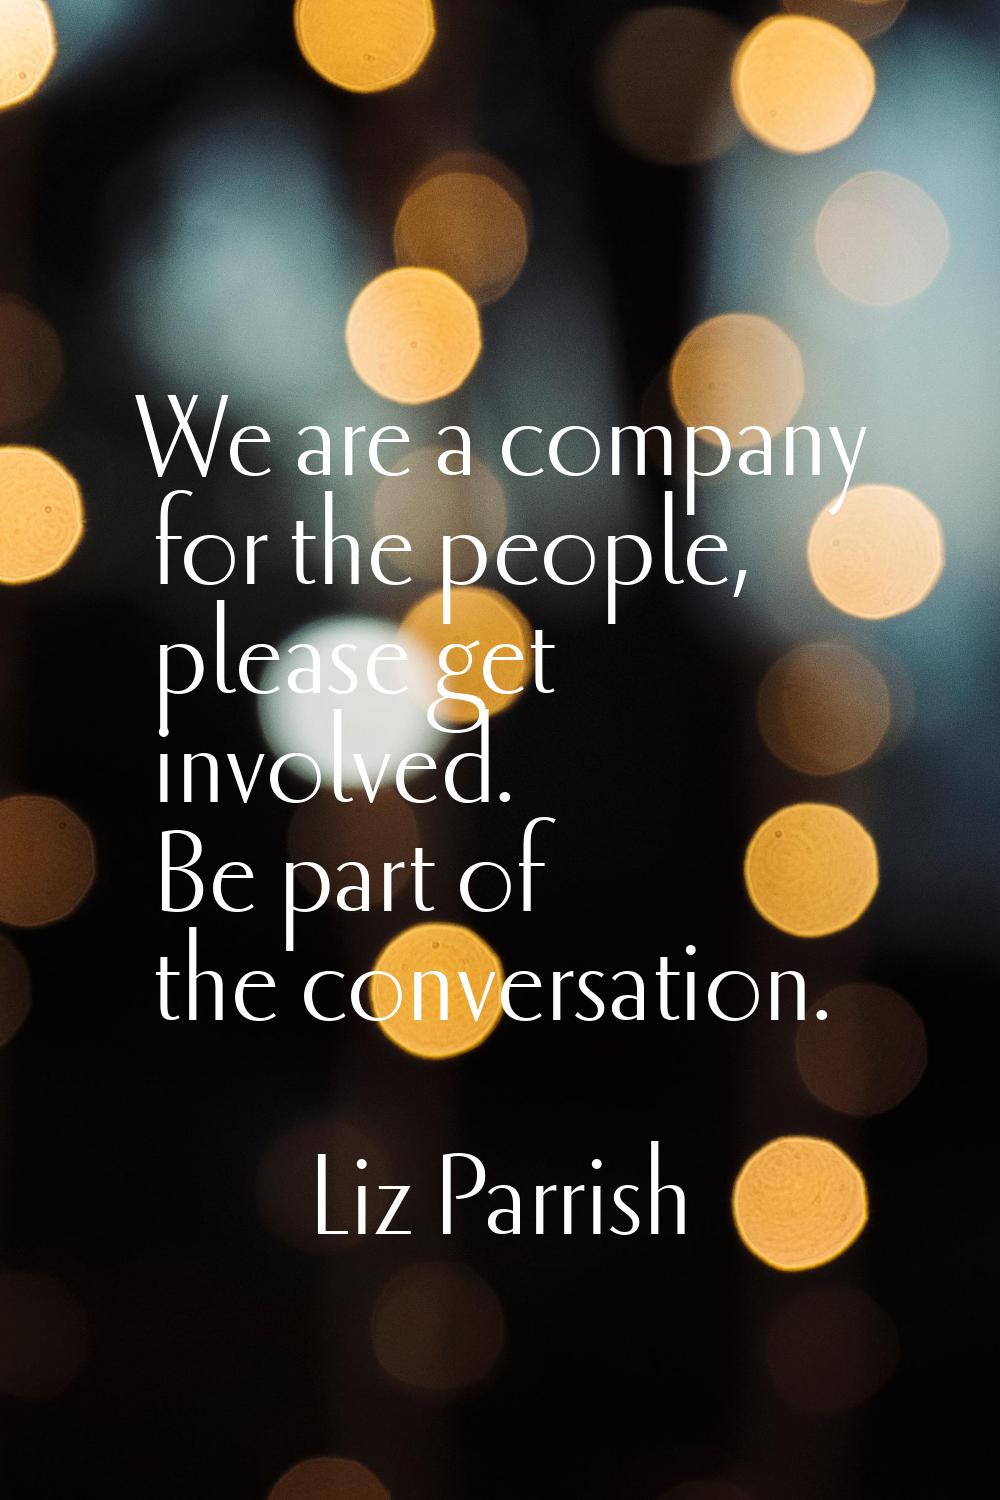 We are a company for the people, please get involved. Be part of the conversation.